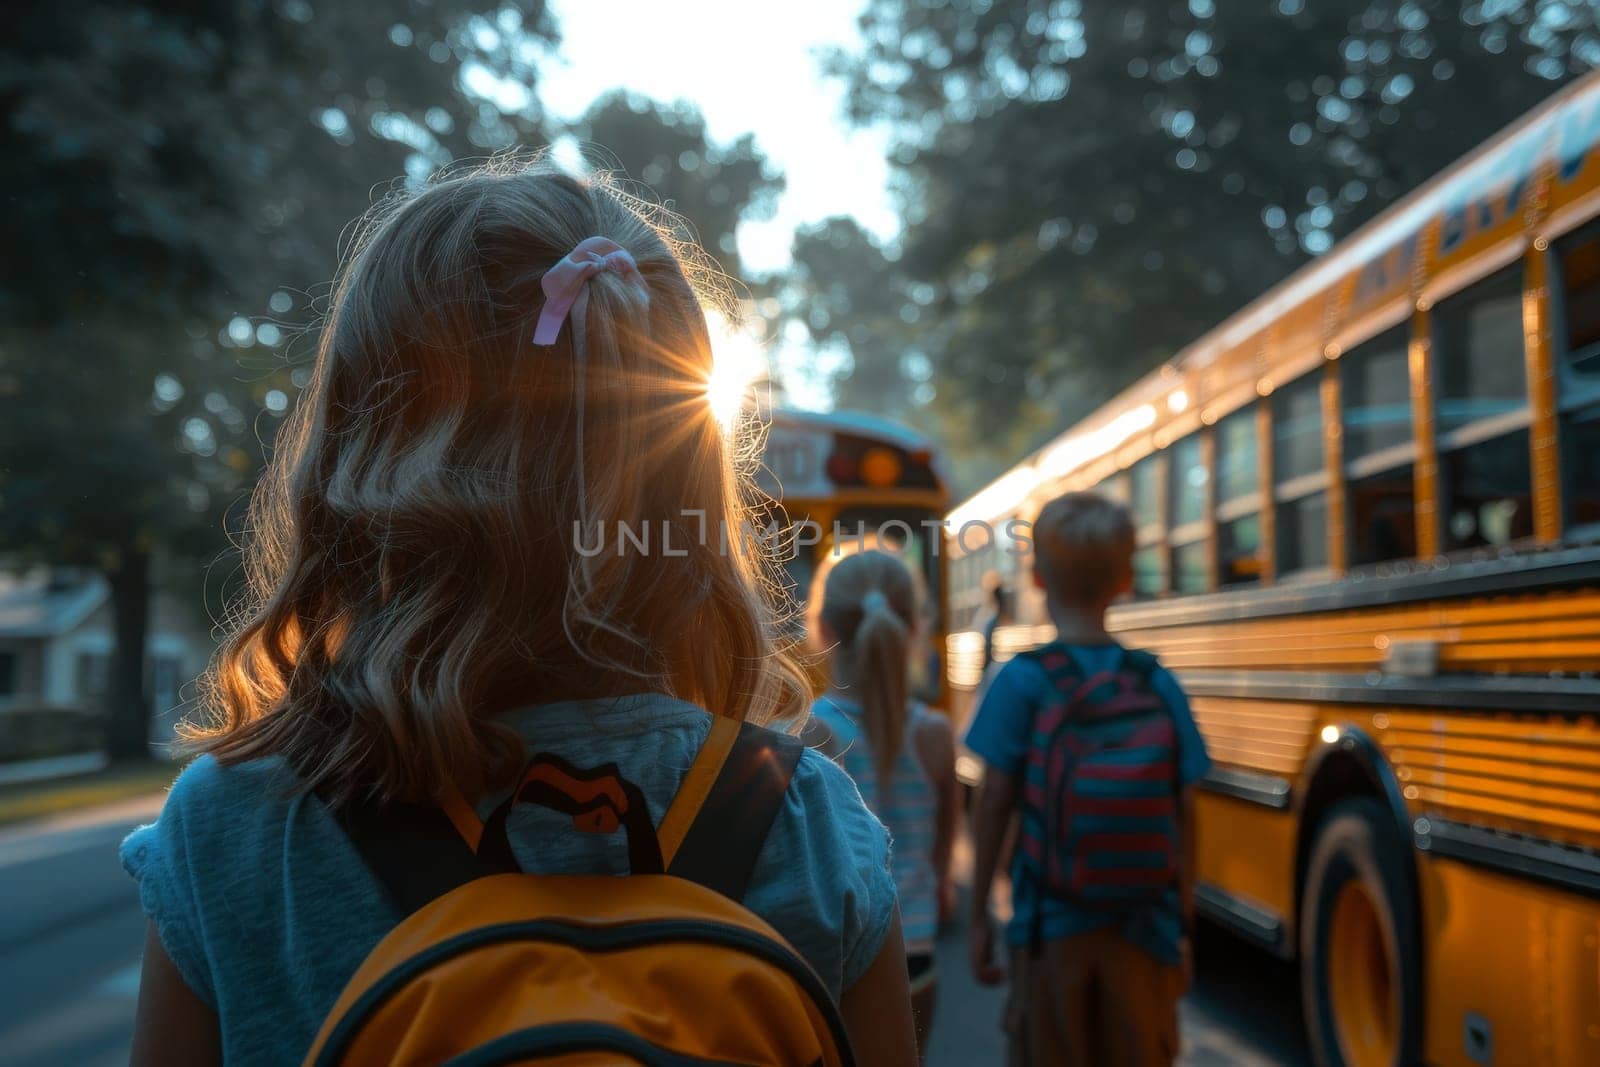 A girl wearing a pink bow in her hair walks with two other children in front of a yellow school bus